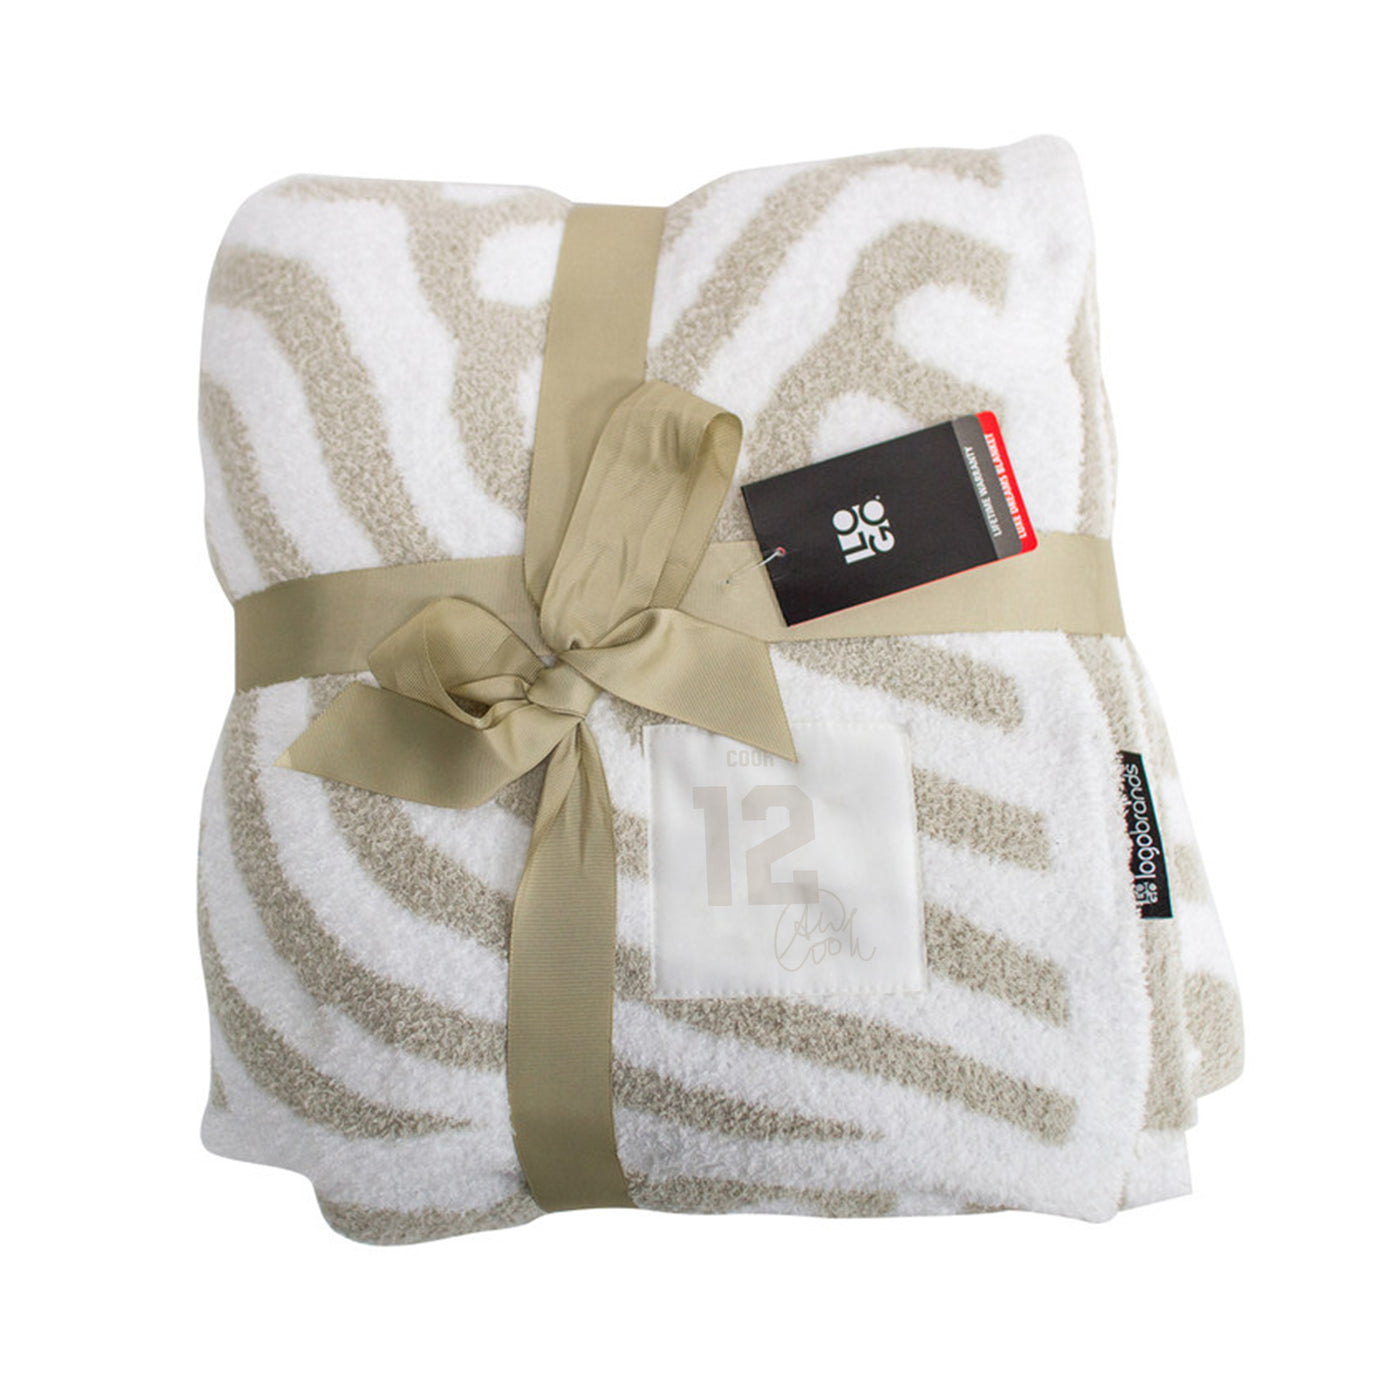 US Womens National Team Alana Cook Luxe Dreams Throw